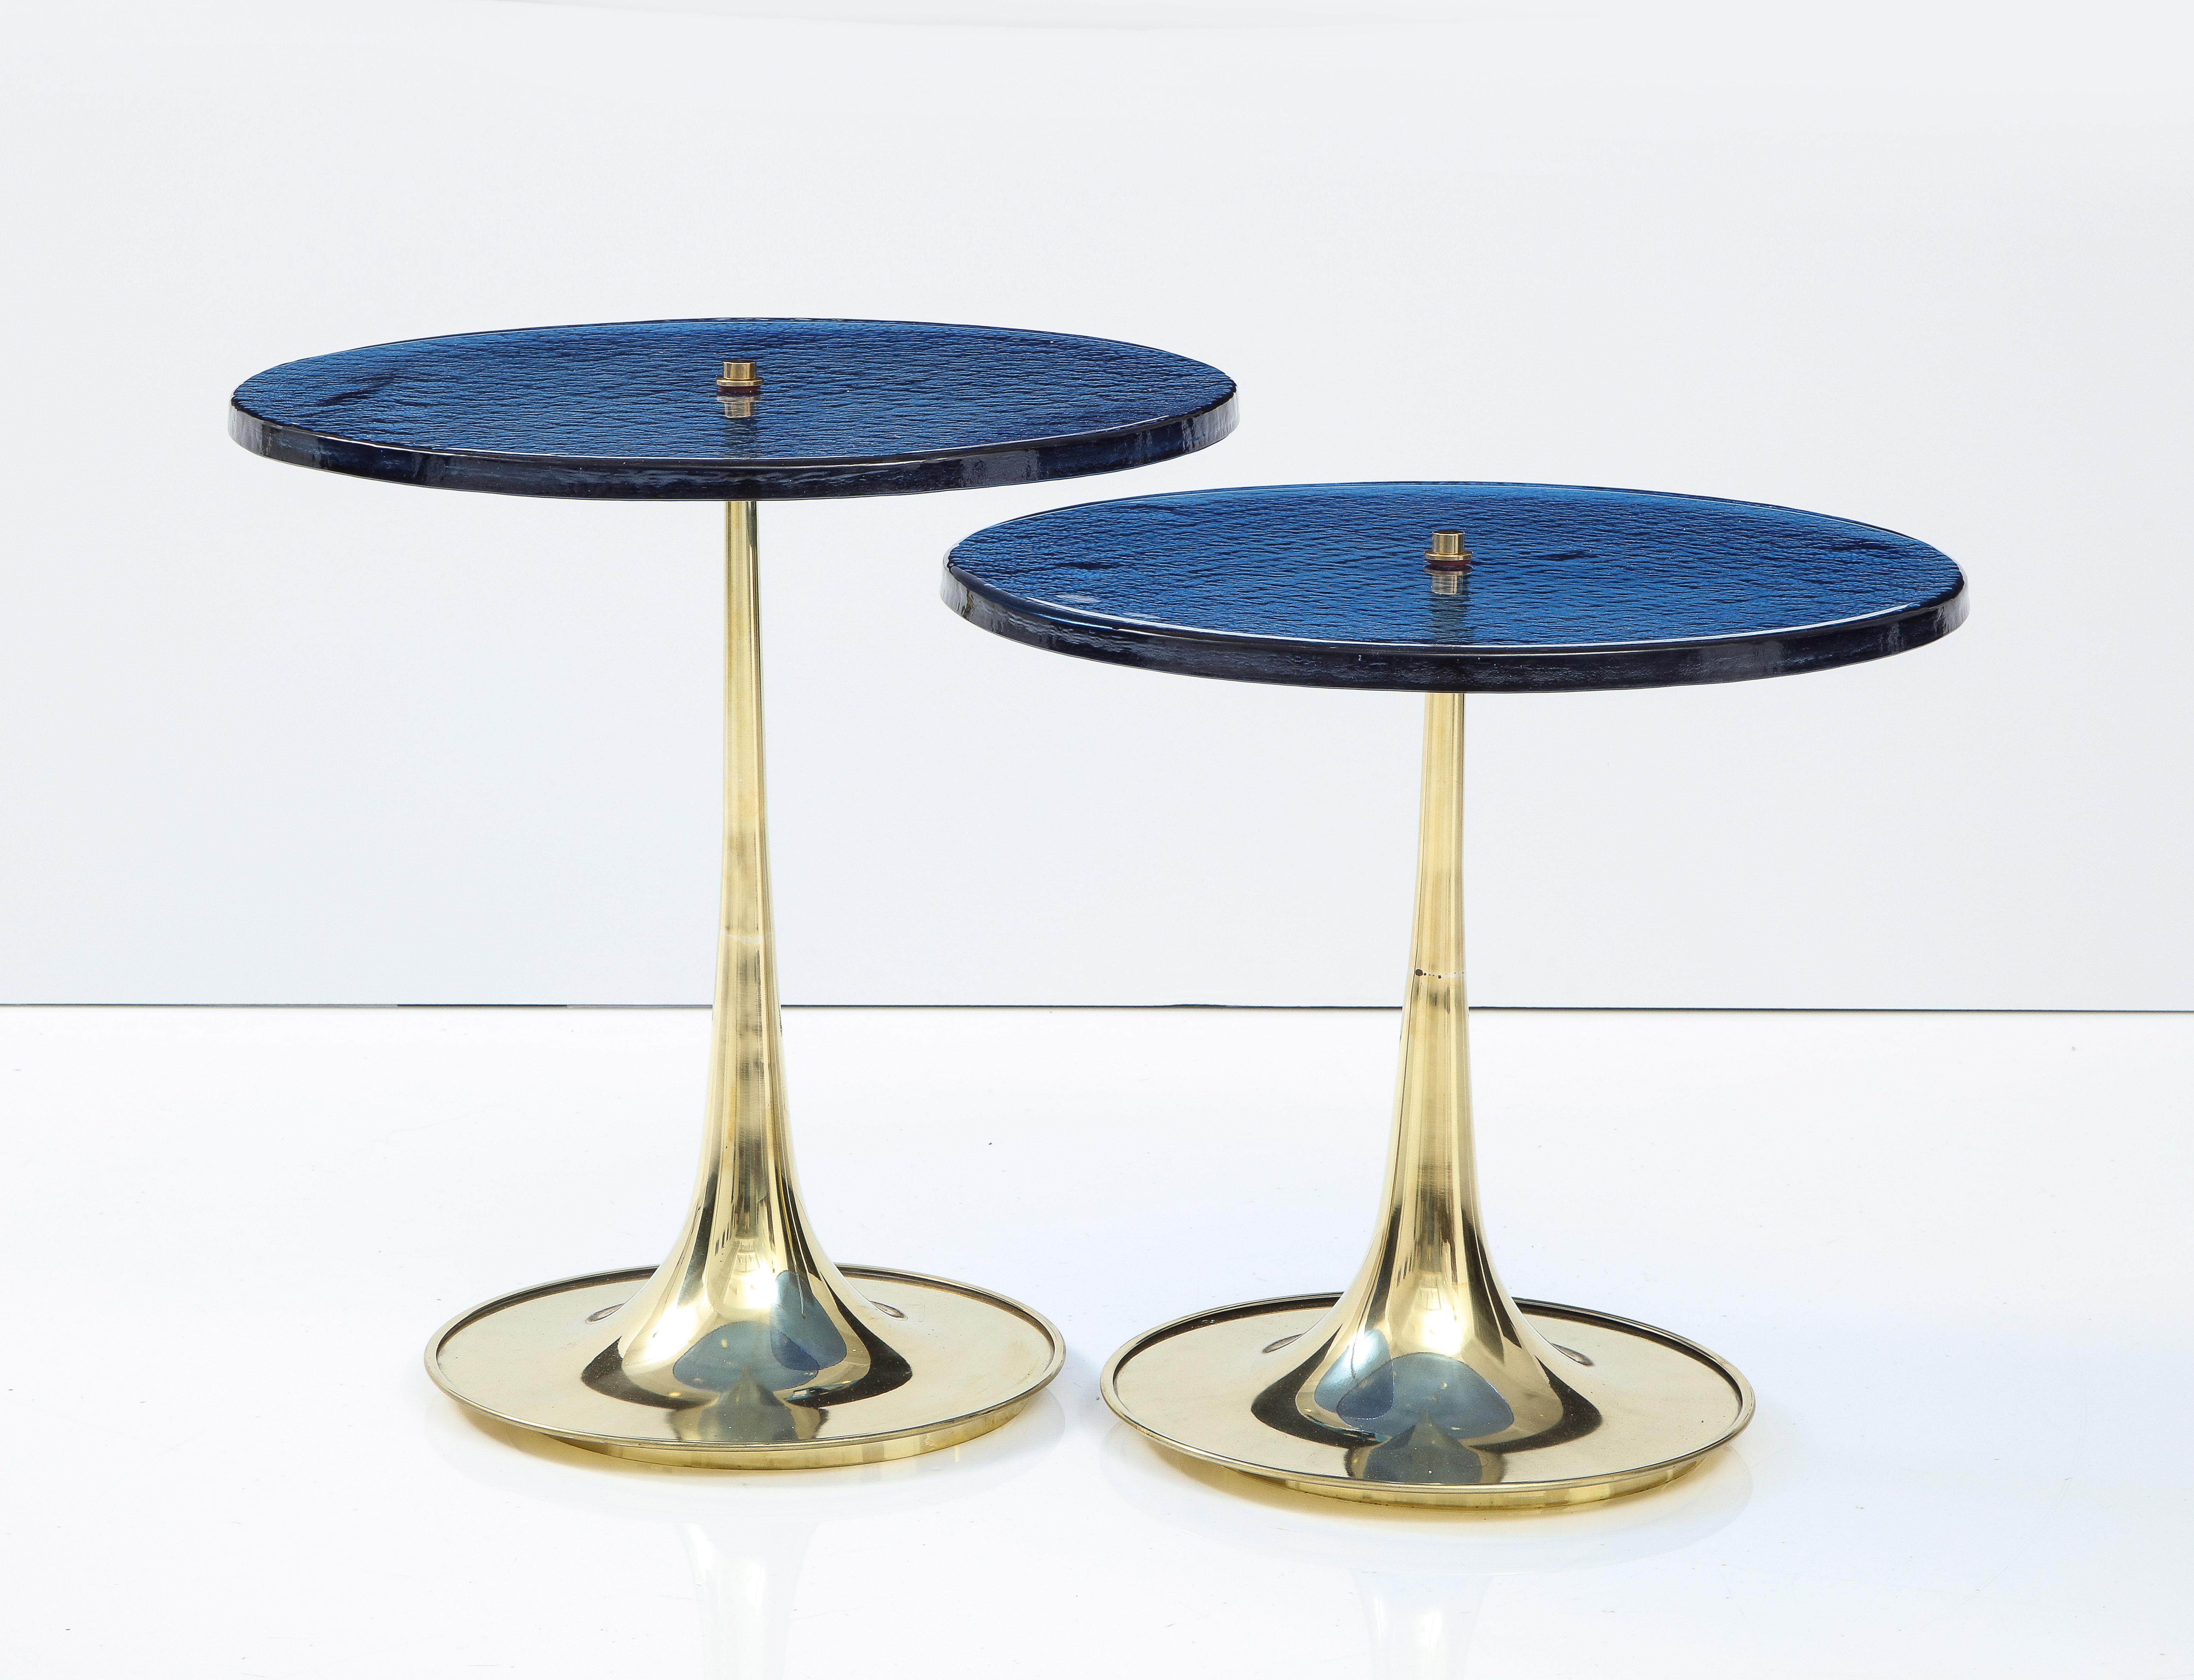 Hand-Crafted Pair of Round Blue Murano Glass and Brass Martini or Side Tables, Italy, 2022